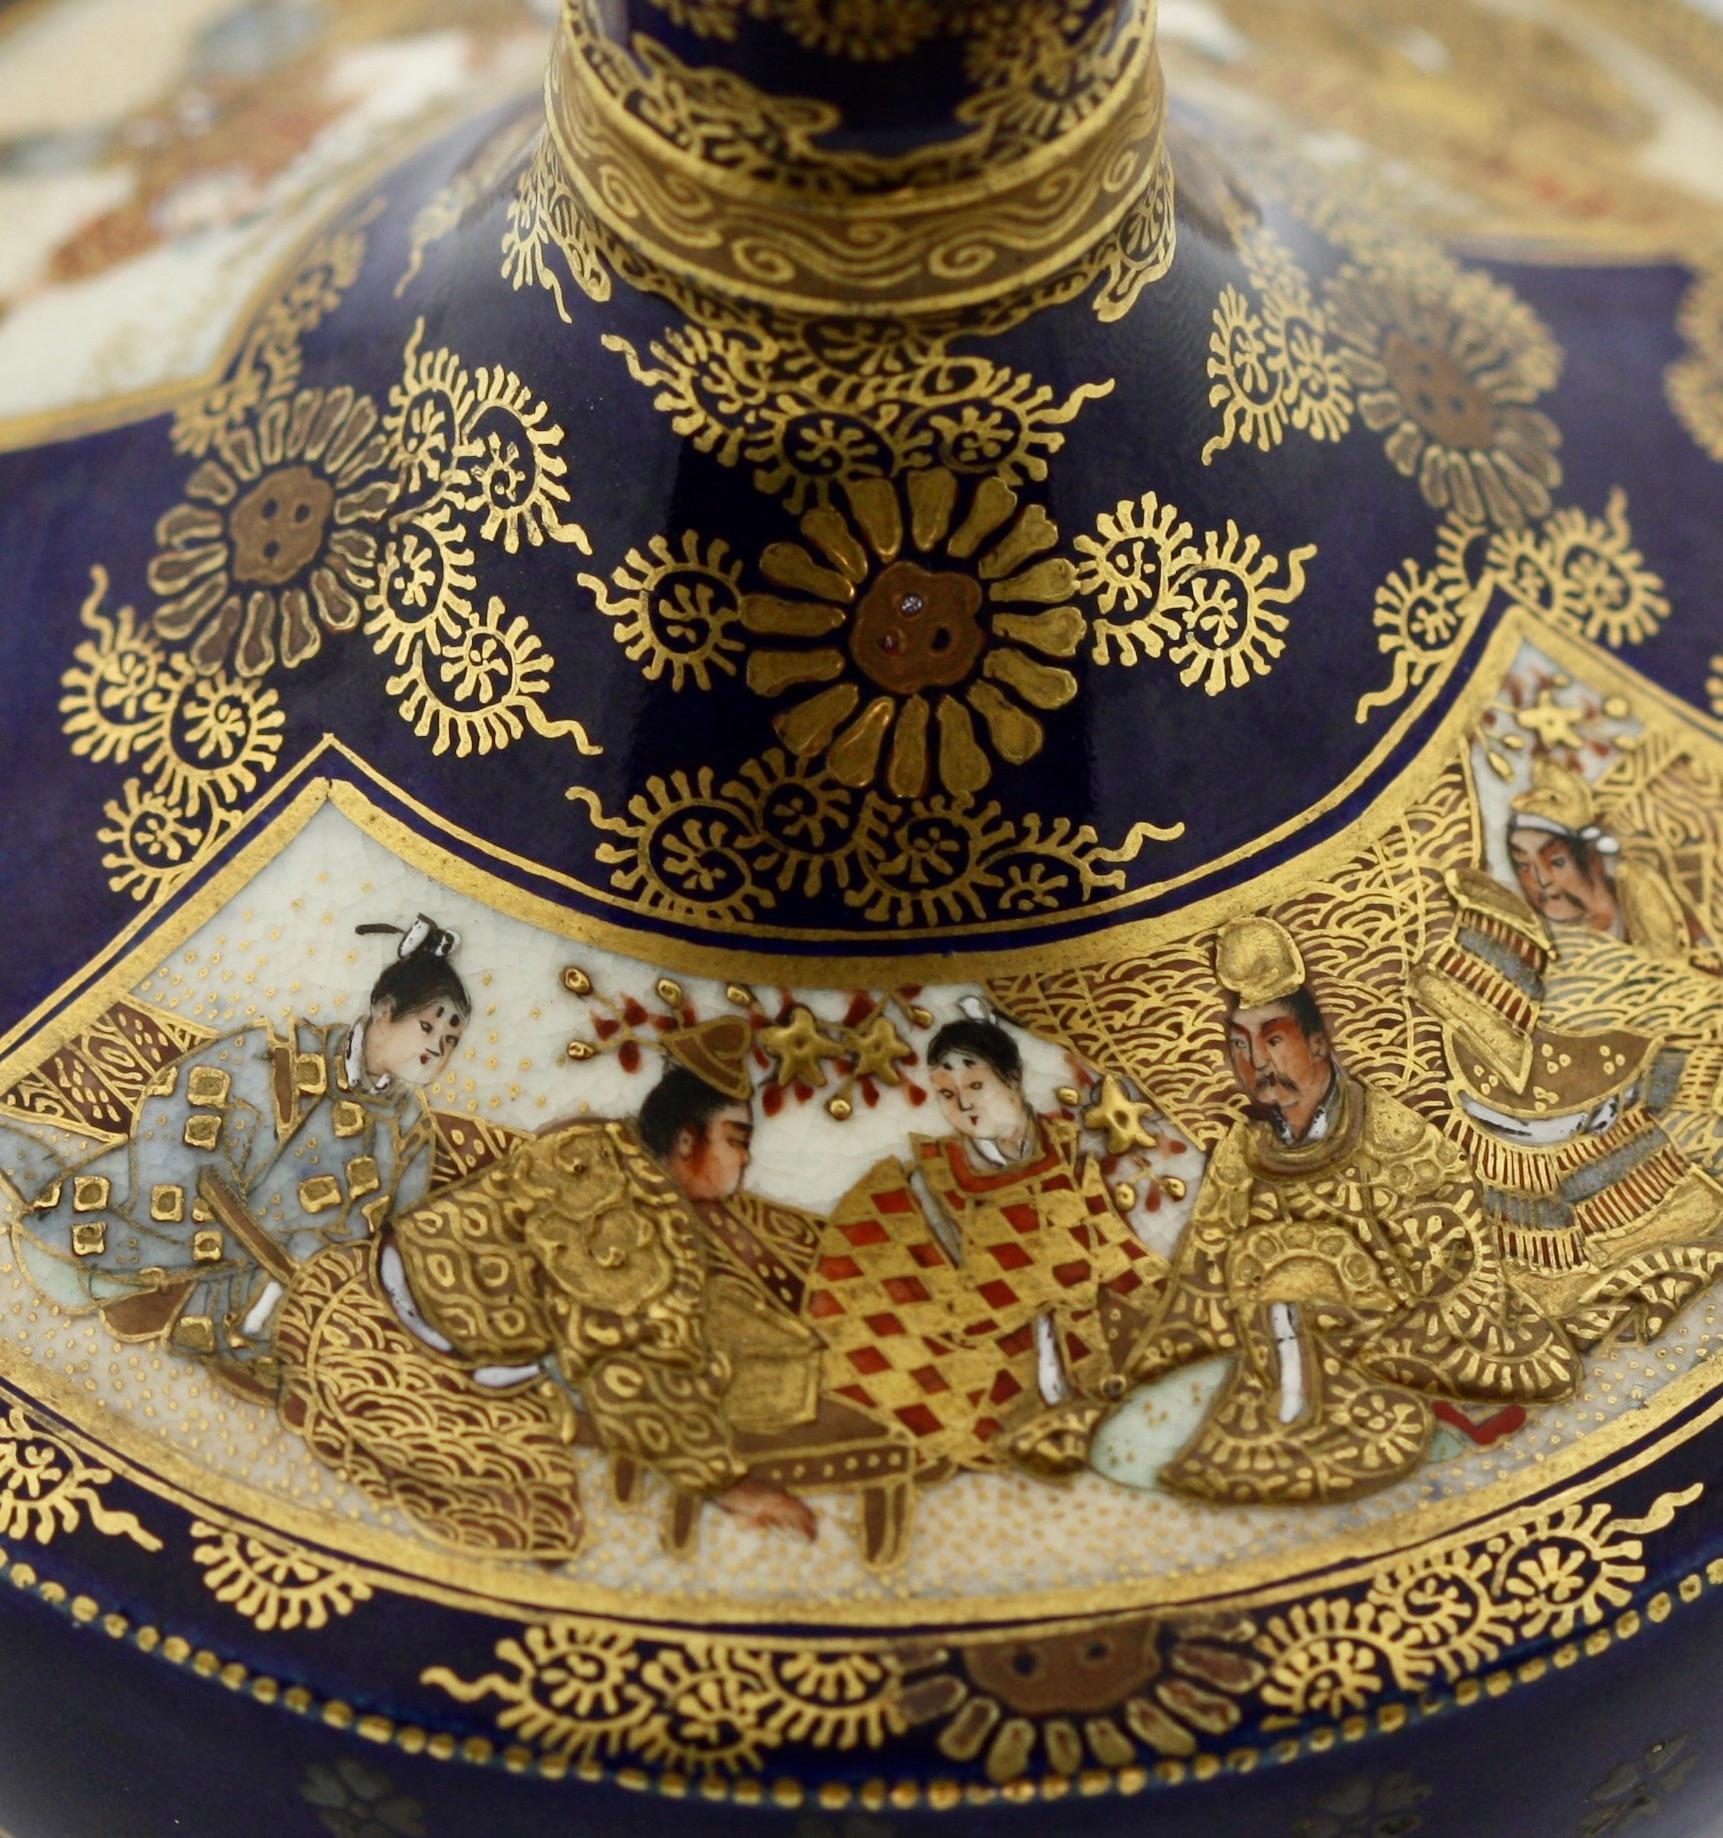 A Satsuma earthenware vase,
by Kinkozan,
Japanese, Meiji period (1868-1912)
decorated in polychrome enamels and gilt over a clear, crackled glaze, delicately painted with a lady and children, the reverse with a flowering garden between